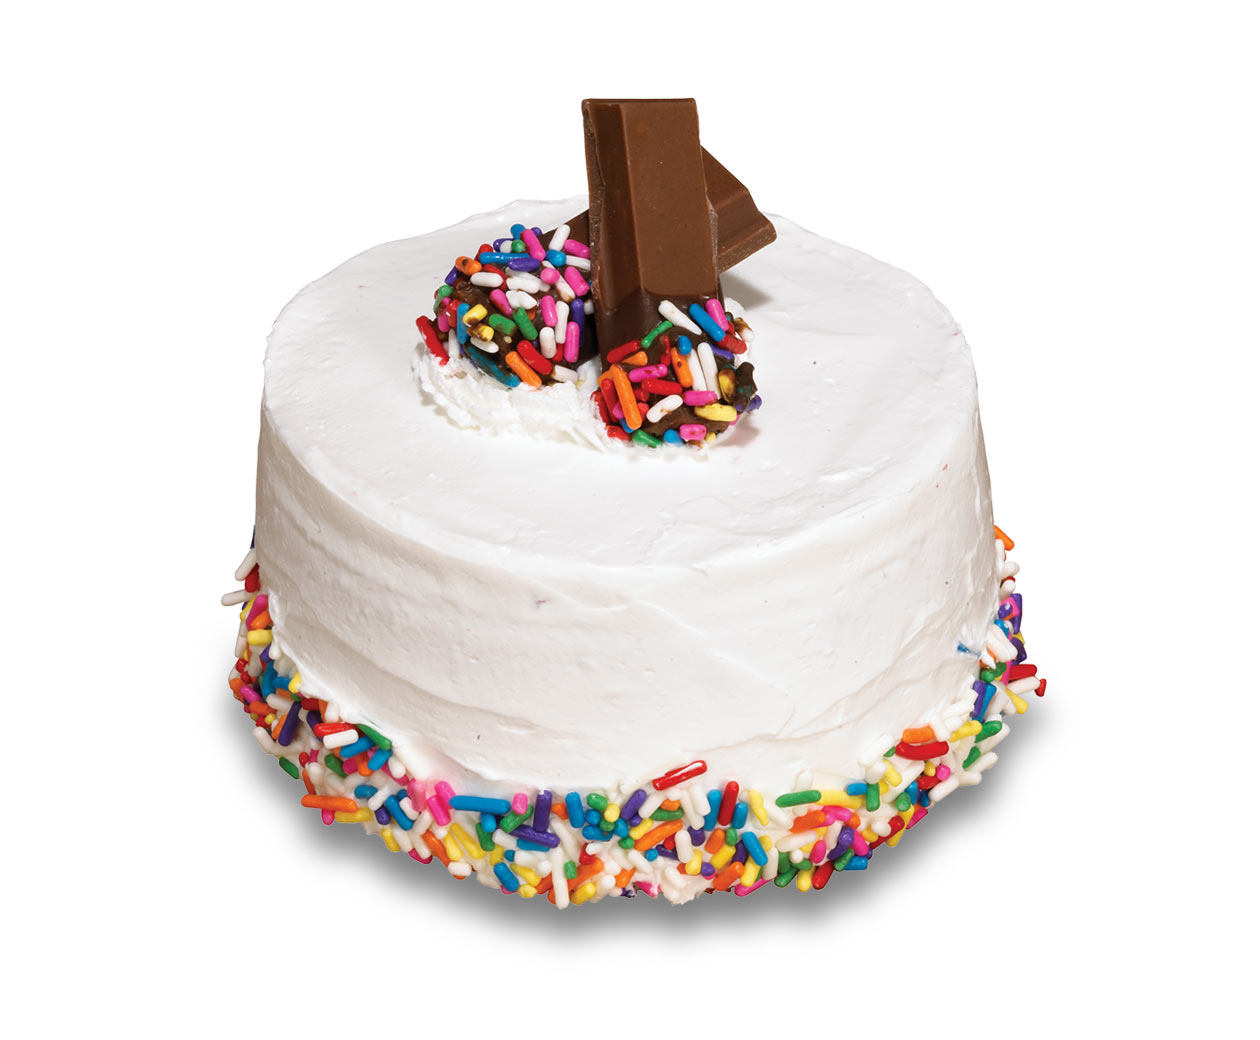 Cold Stone Cakes Prices, Models & How to Order Bakery